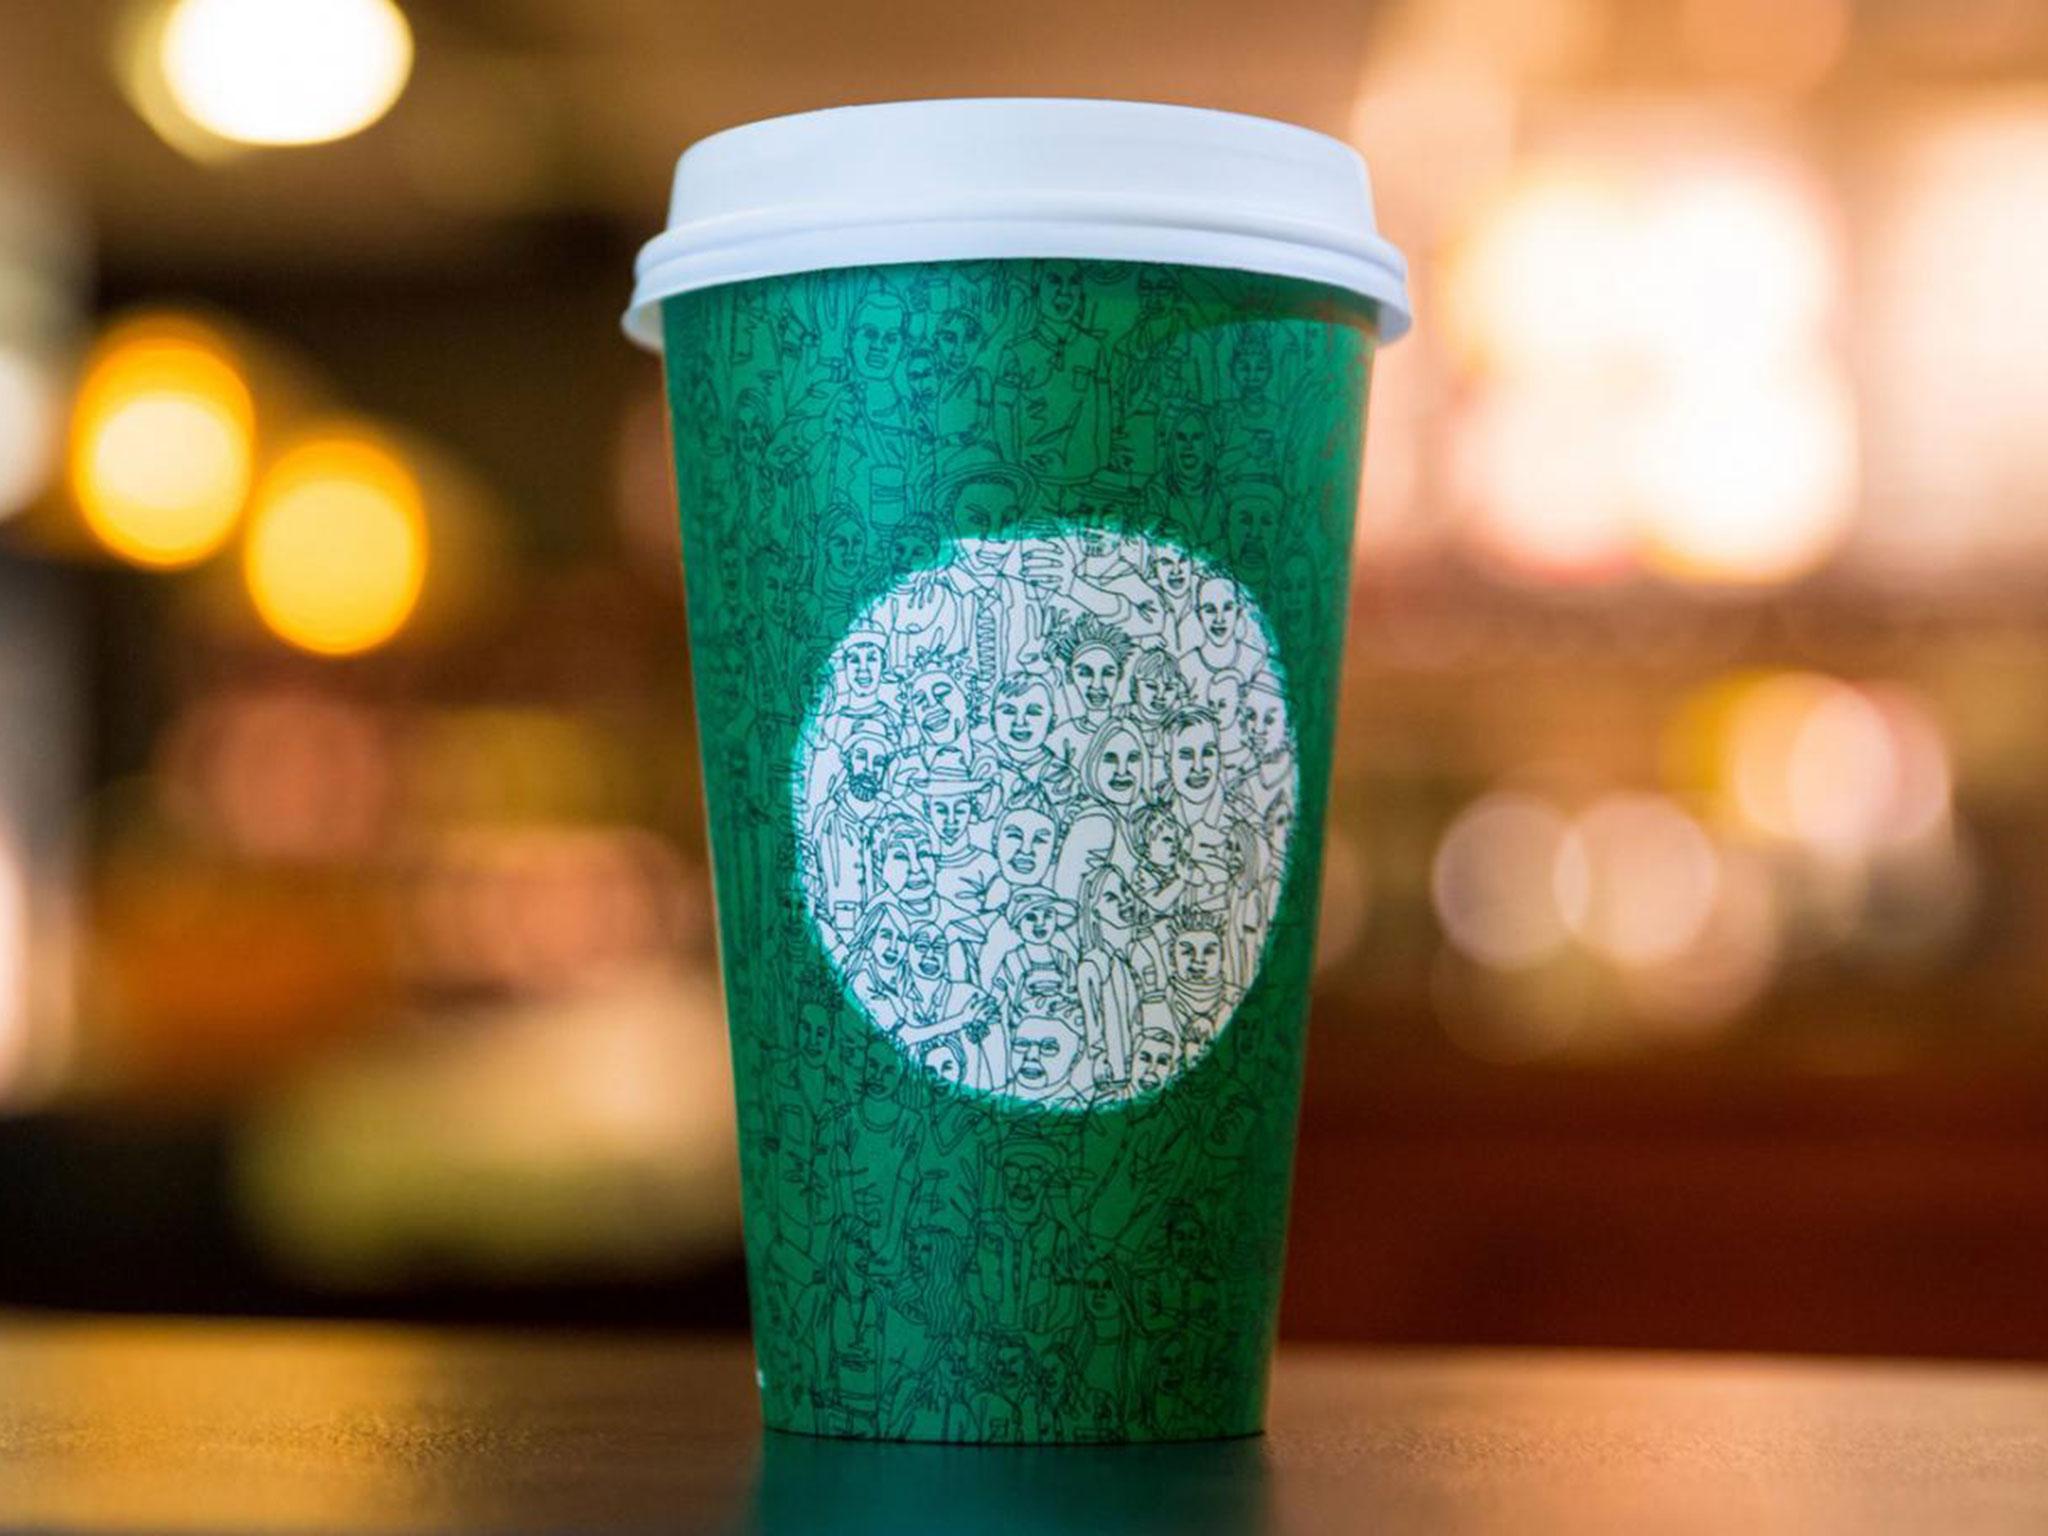 Starbucks criticised for 'politicising' coffee with green cup